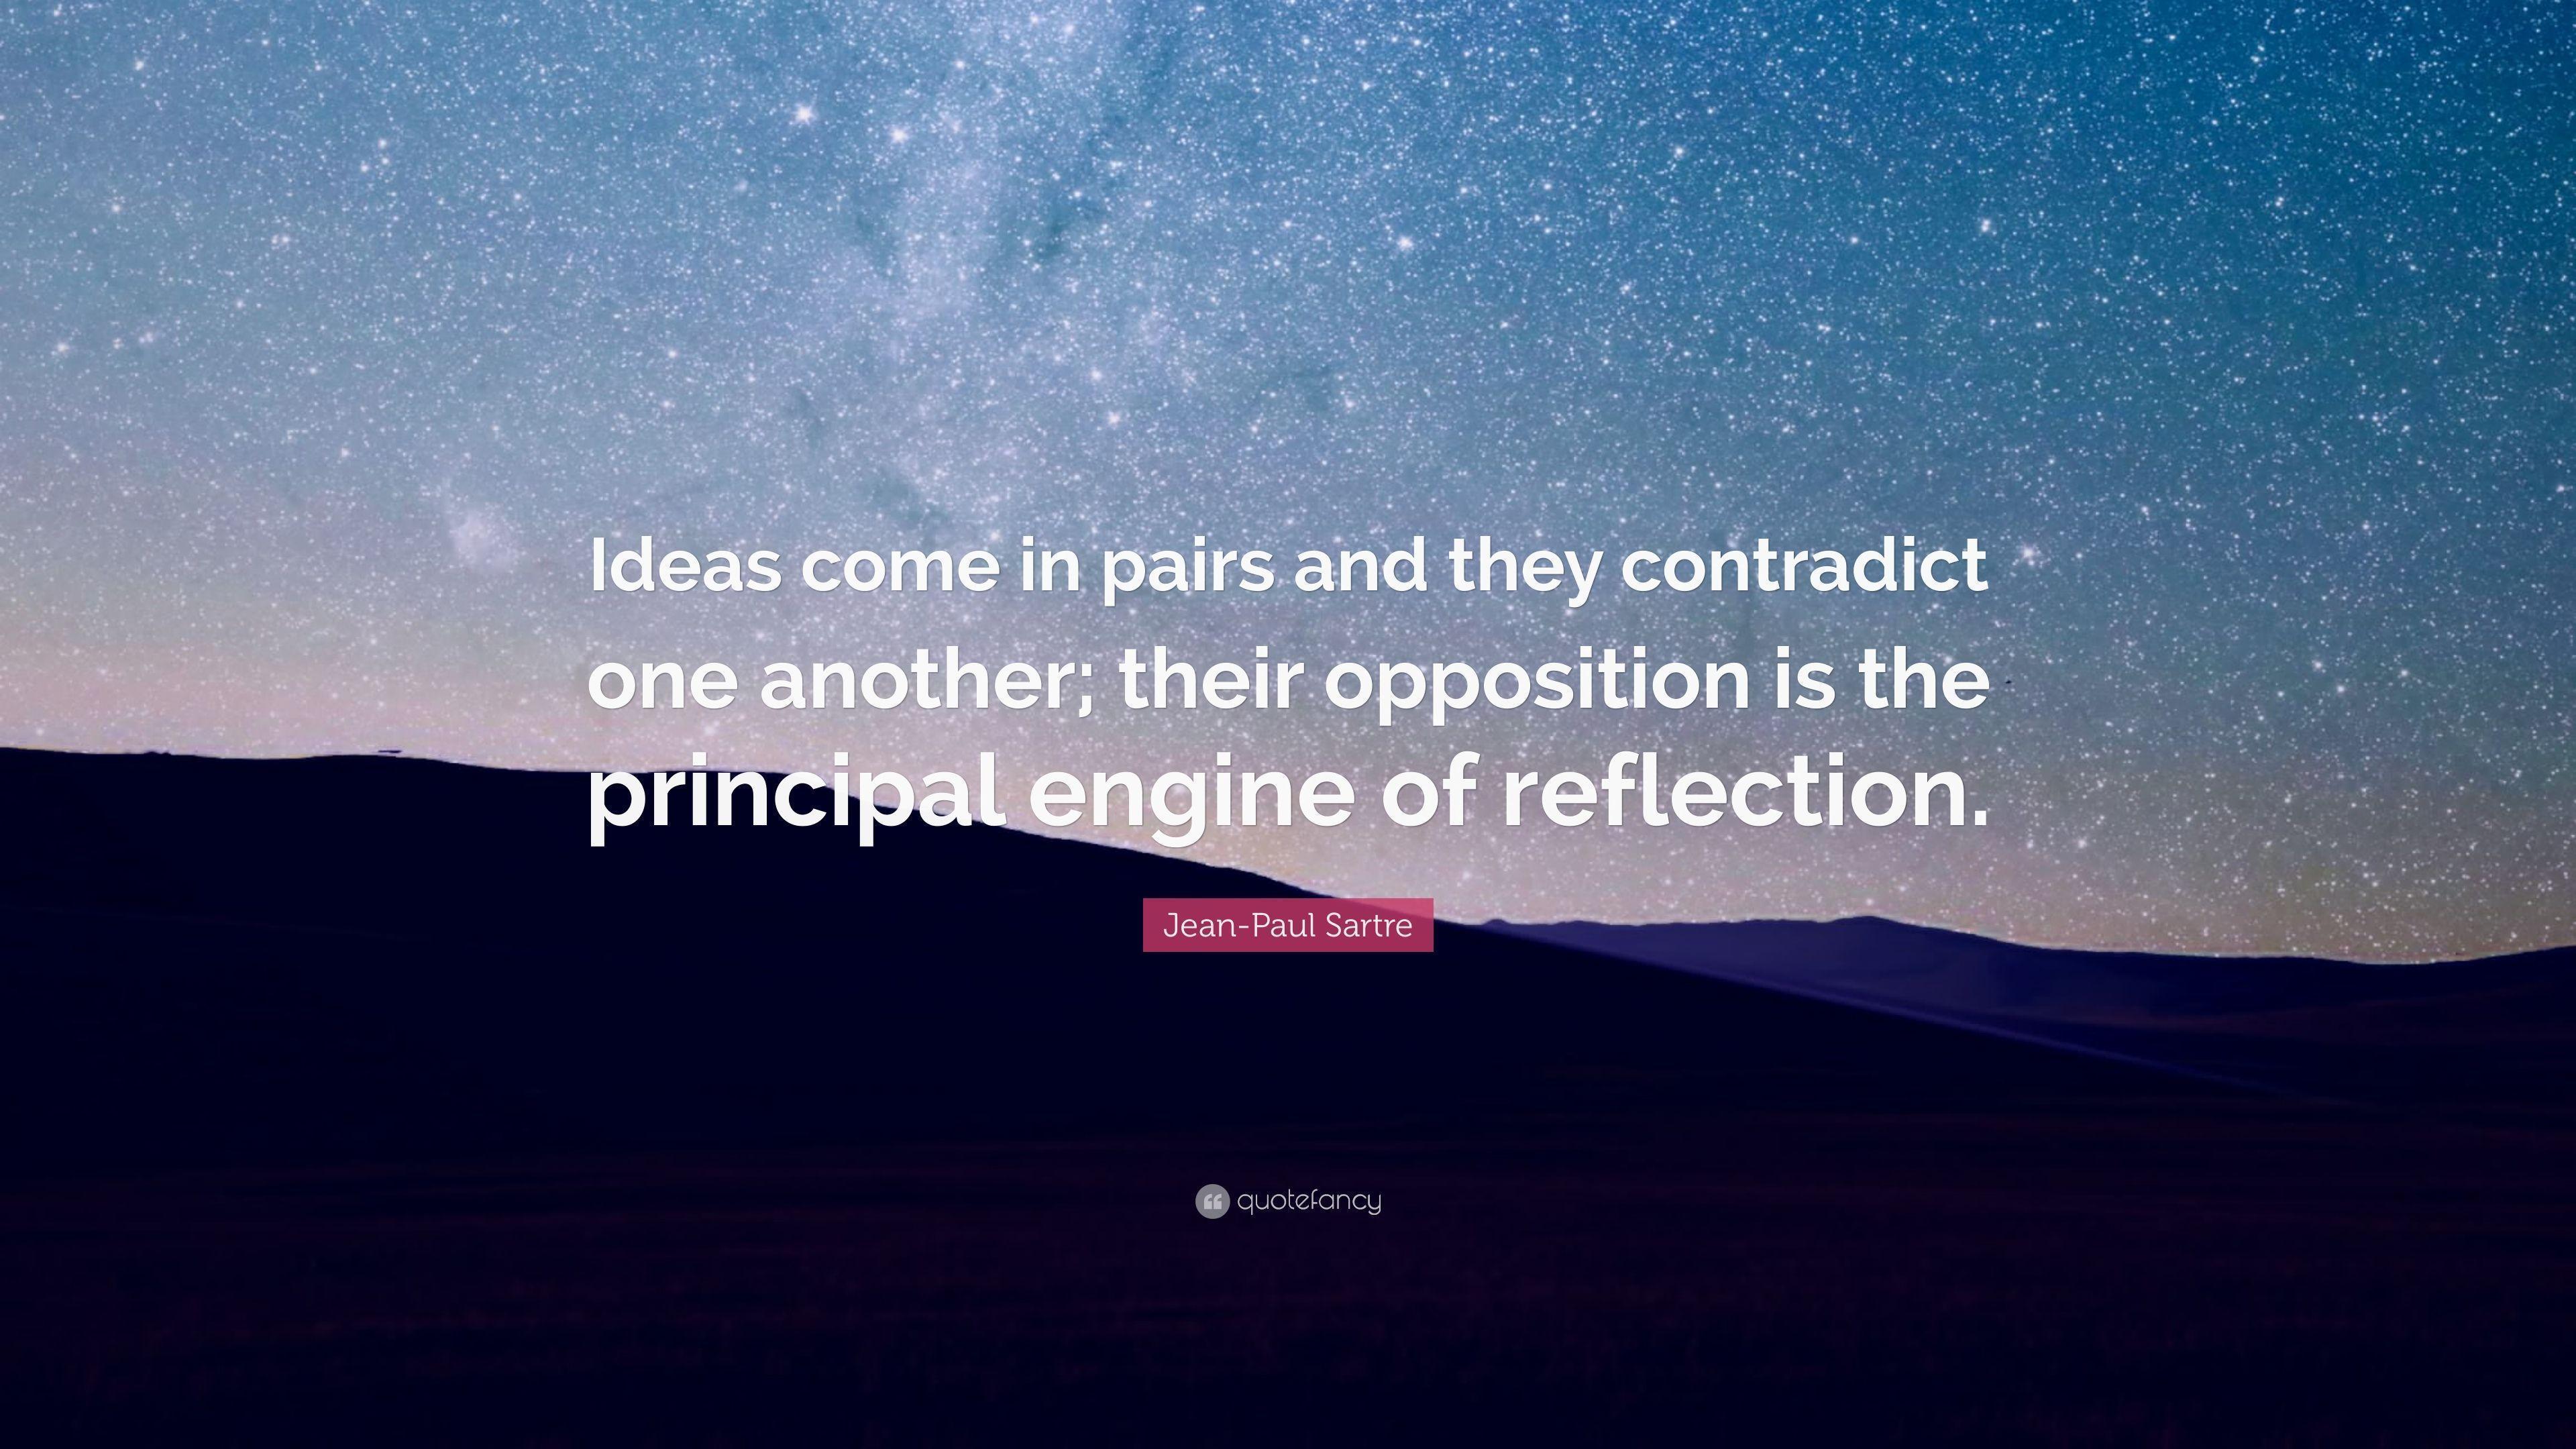 Jean Paul Sartre Quote: “Ideas Come In Pairs And They Contradict